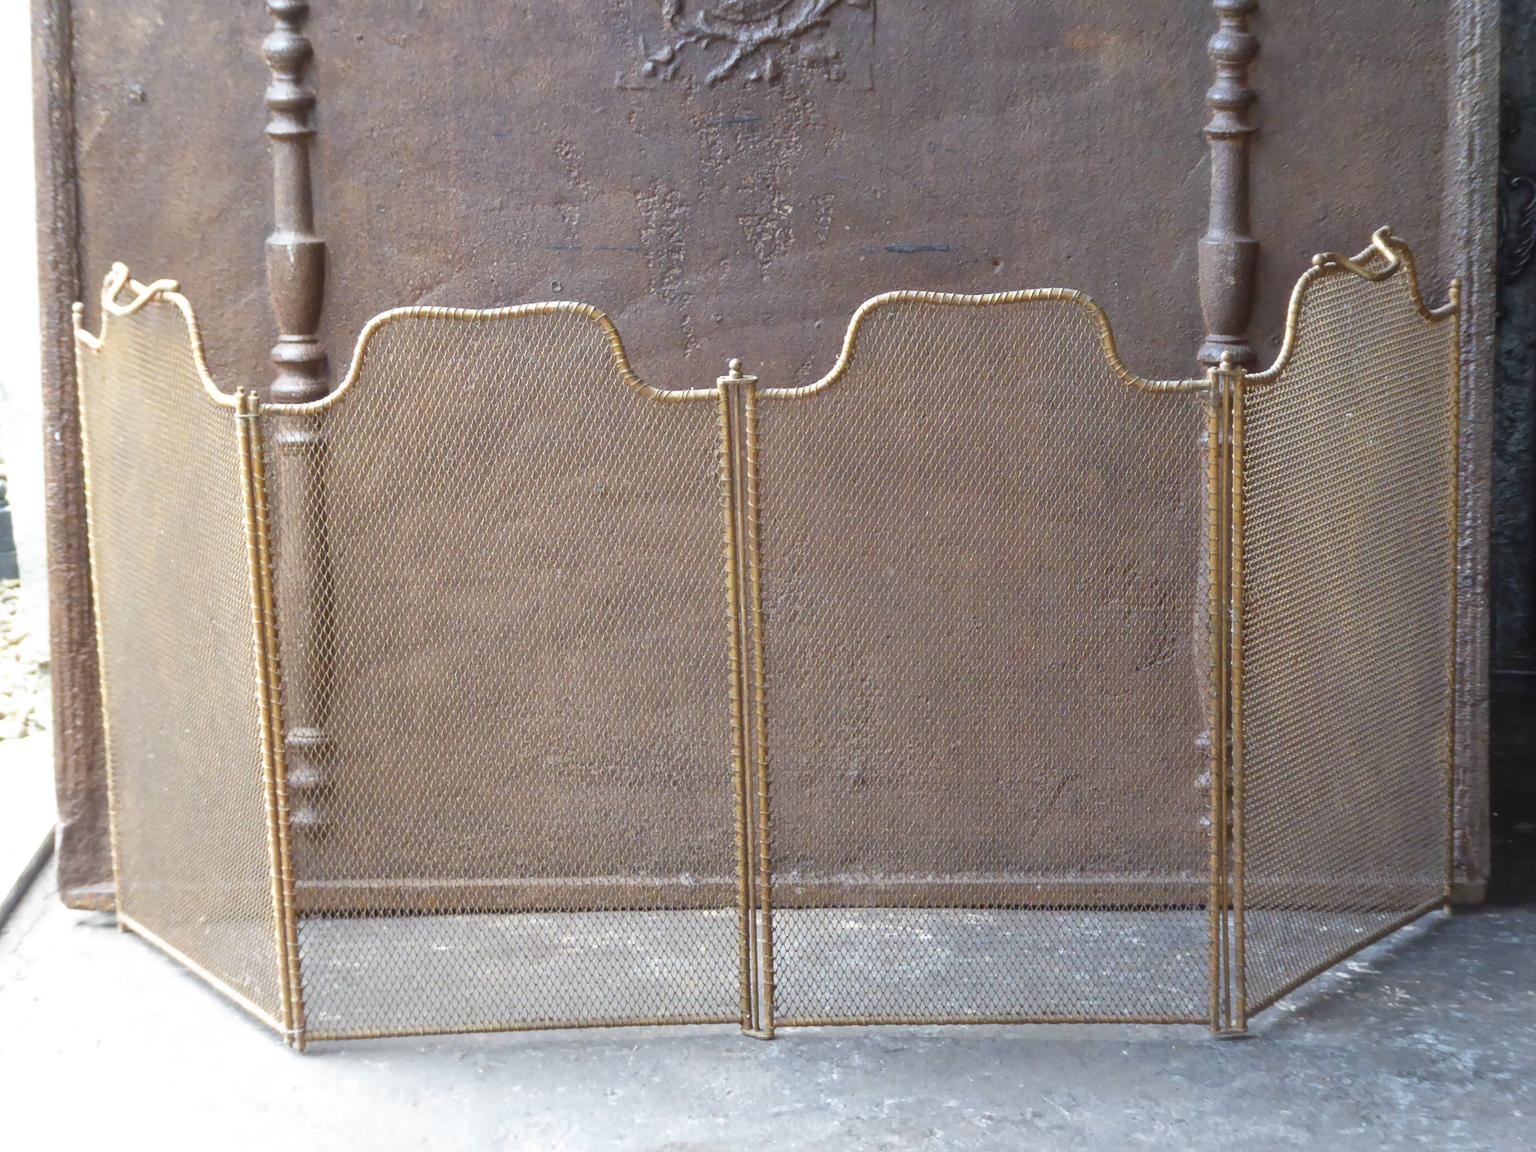 19th century French Napoleon III four panel fireplace screen. The screen is made of brass, iron and iron mesh. It is in a good condition and is fit for use in front of the fireplace.